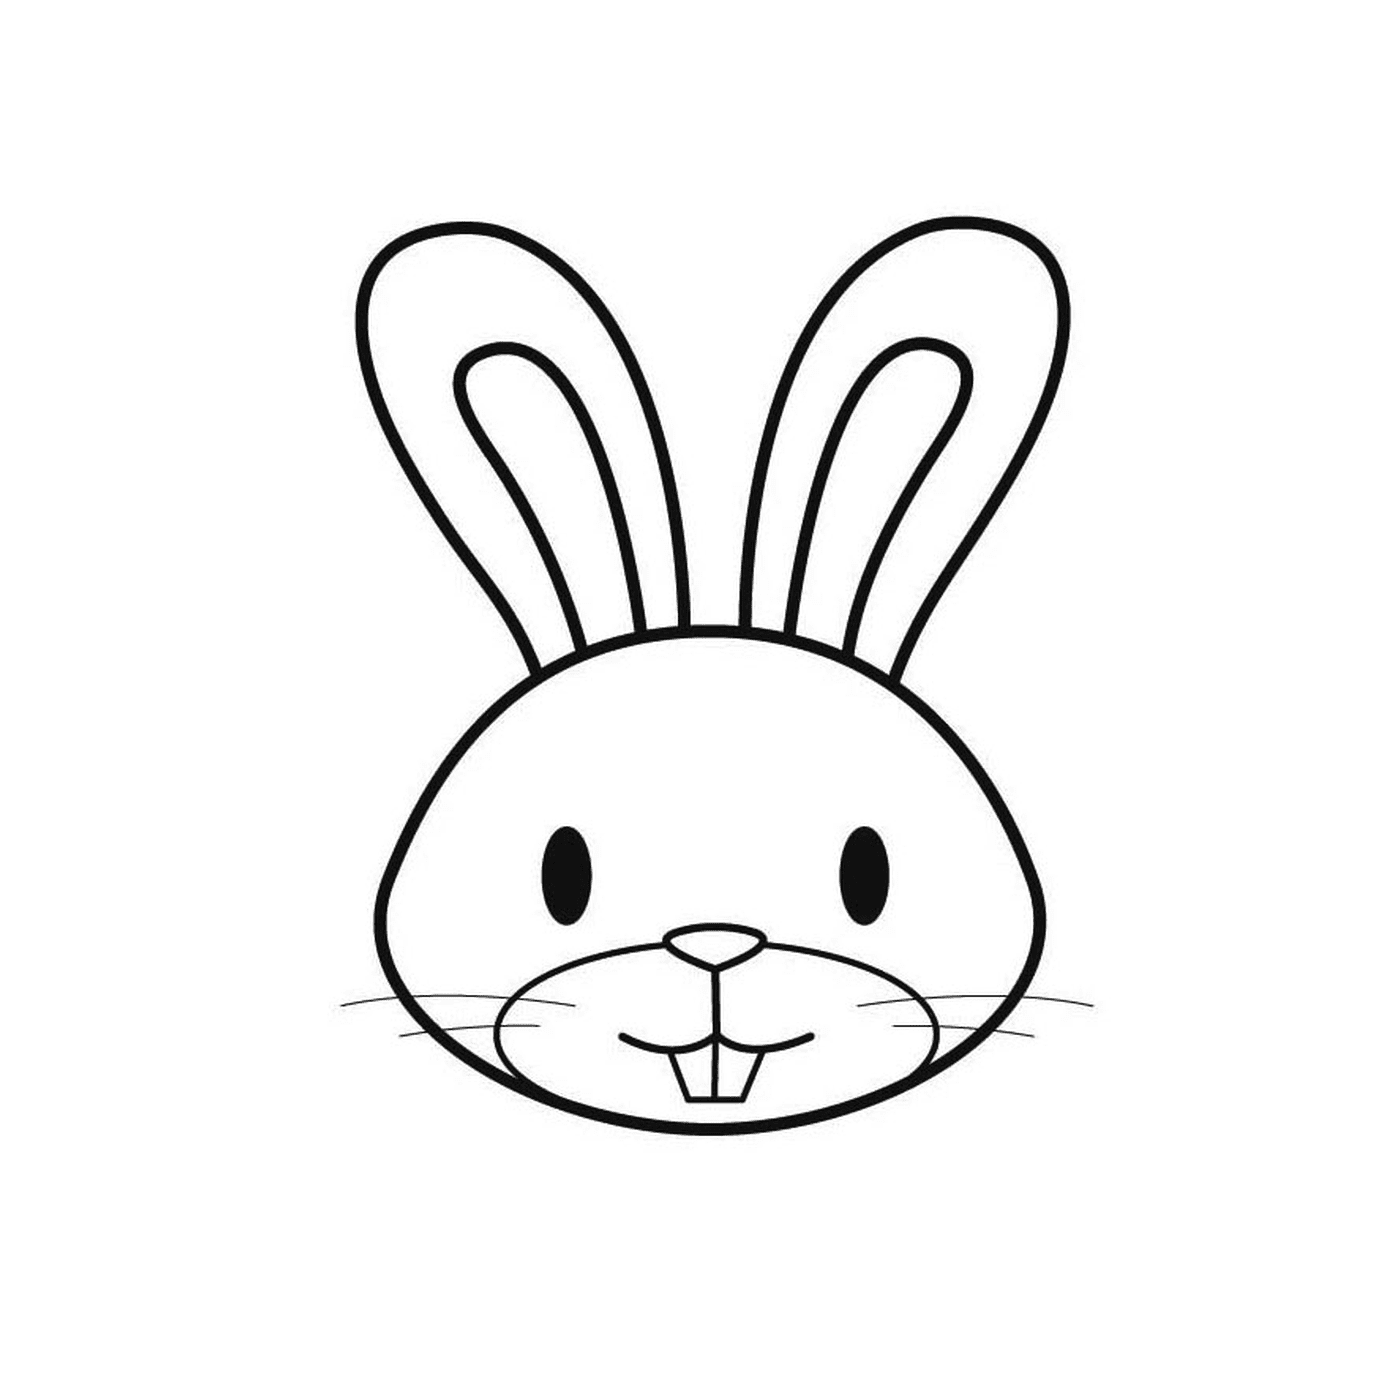  A rabbit face for Easter 